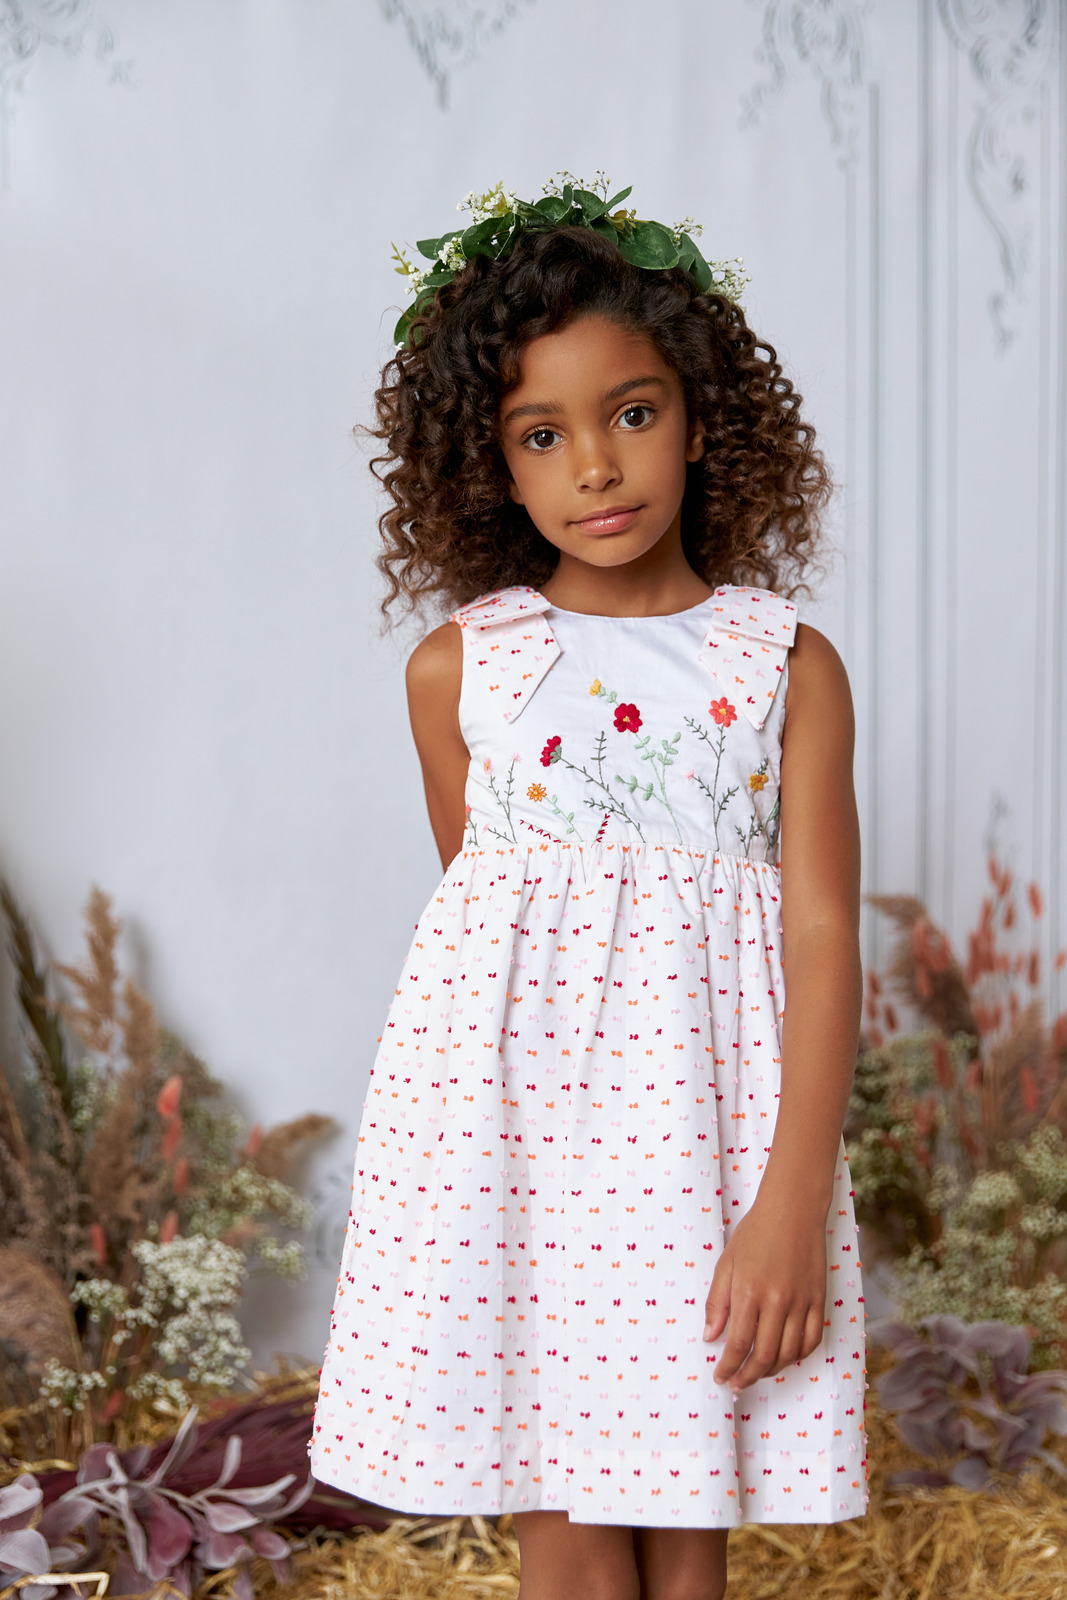 ** SOLD OUT ** The hand embroidered ALMA dress